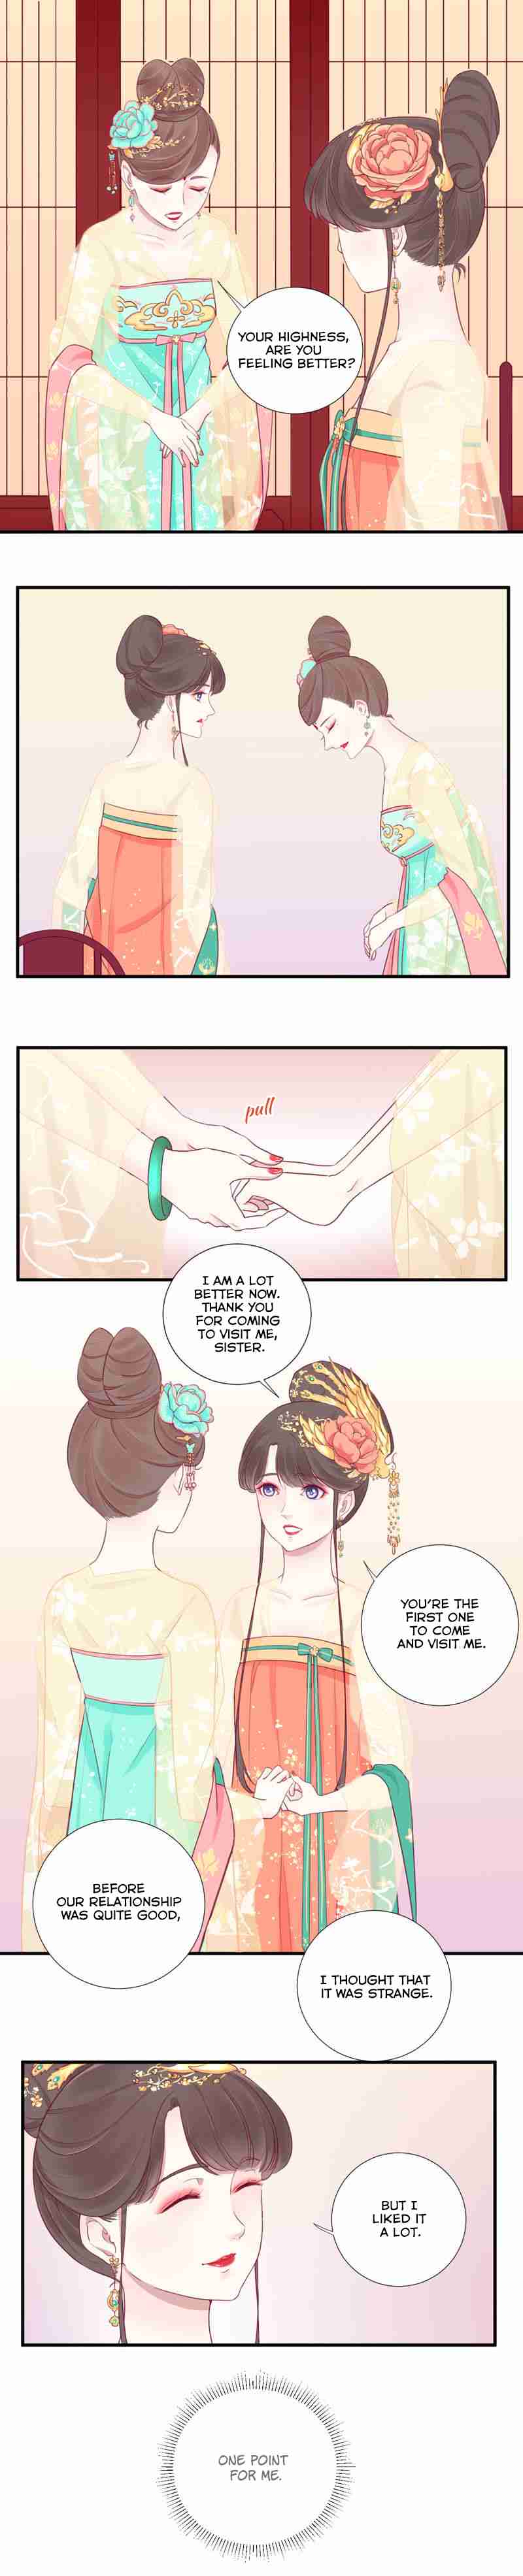 The Queen Is Busy Ch. 6 Confrontation with Xiao Fei